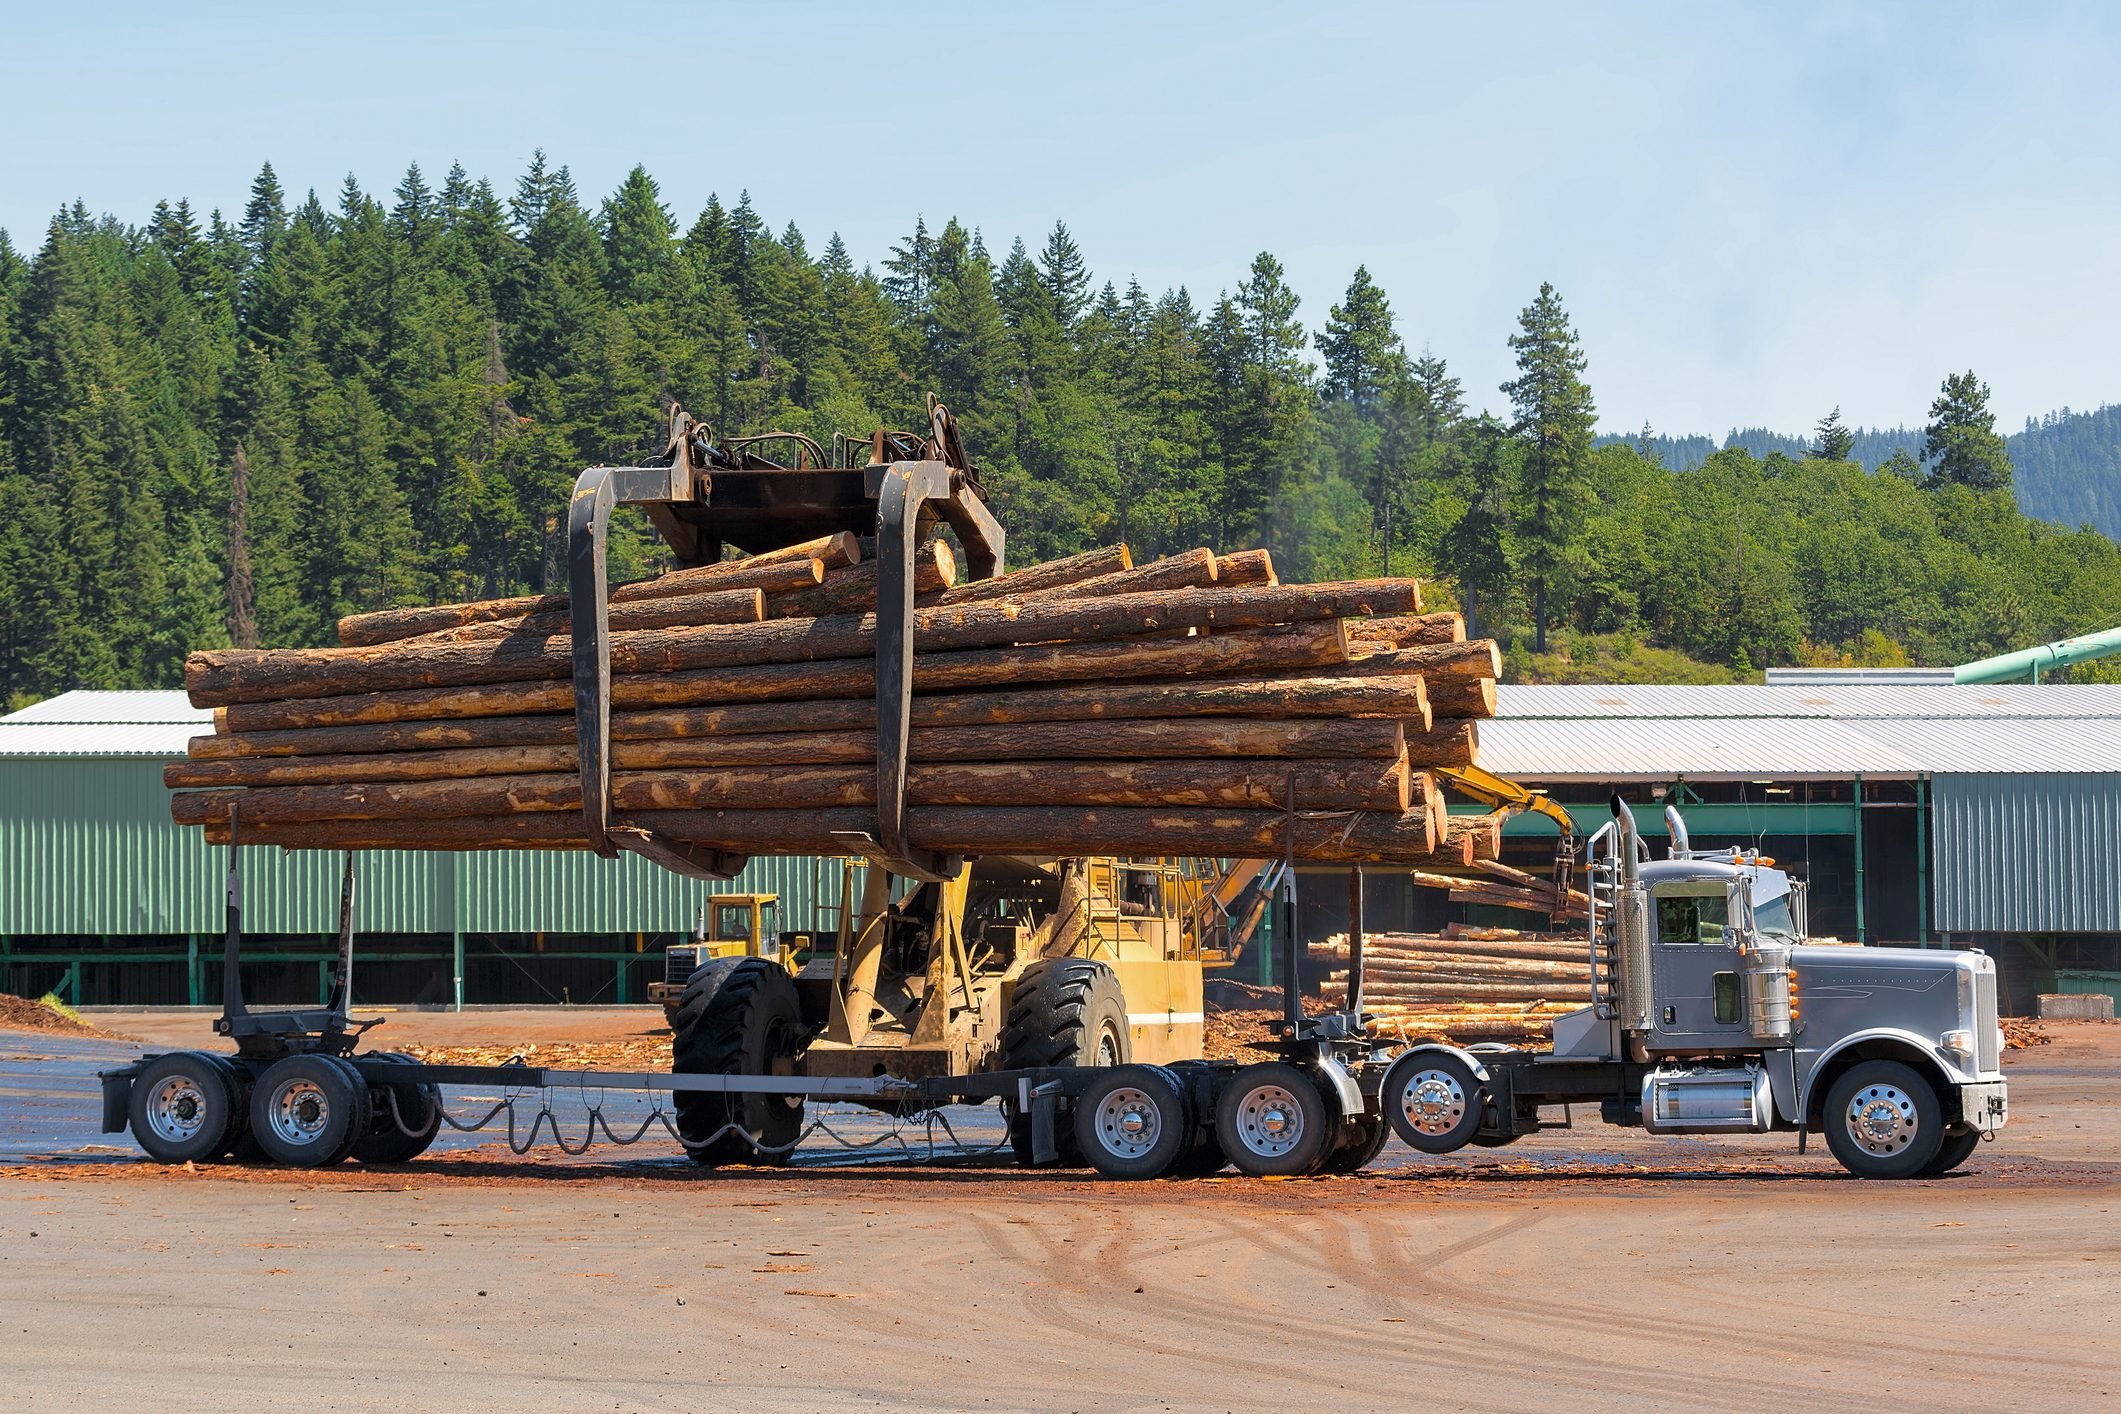 Sustainable wooden Logs unloading off semi truck at lumber yard